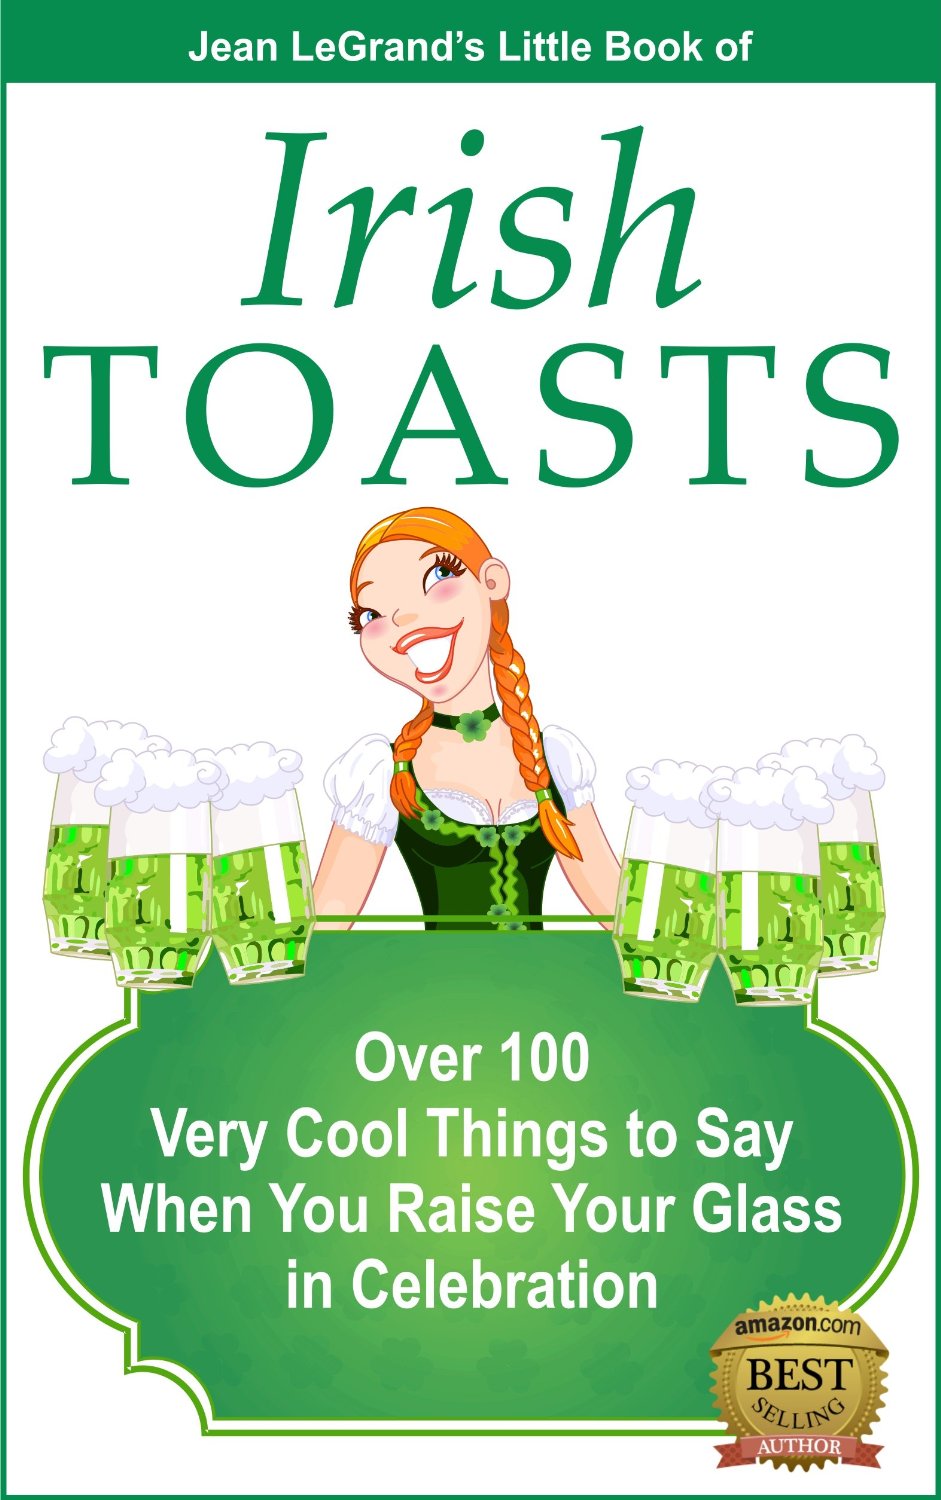 IRISH TOASTS – Over 100 Very Cool Things to Say When You Raise Your Glass in Celebration by Jean LeGrand